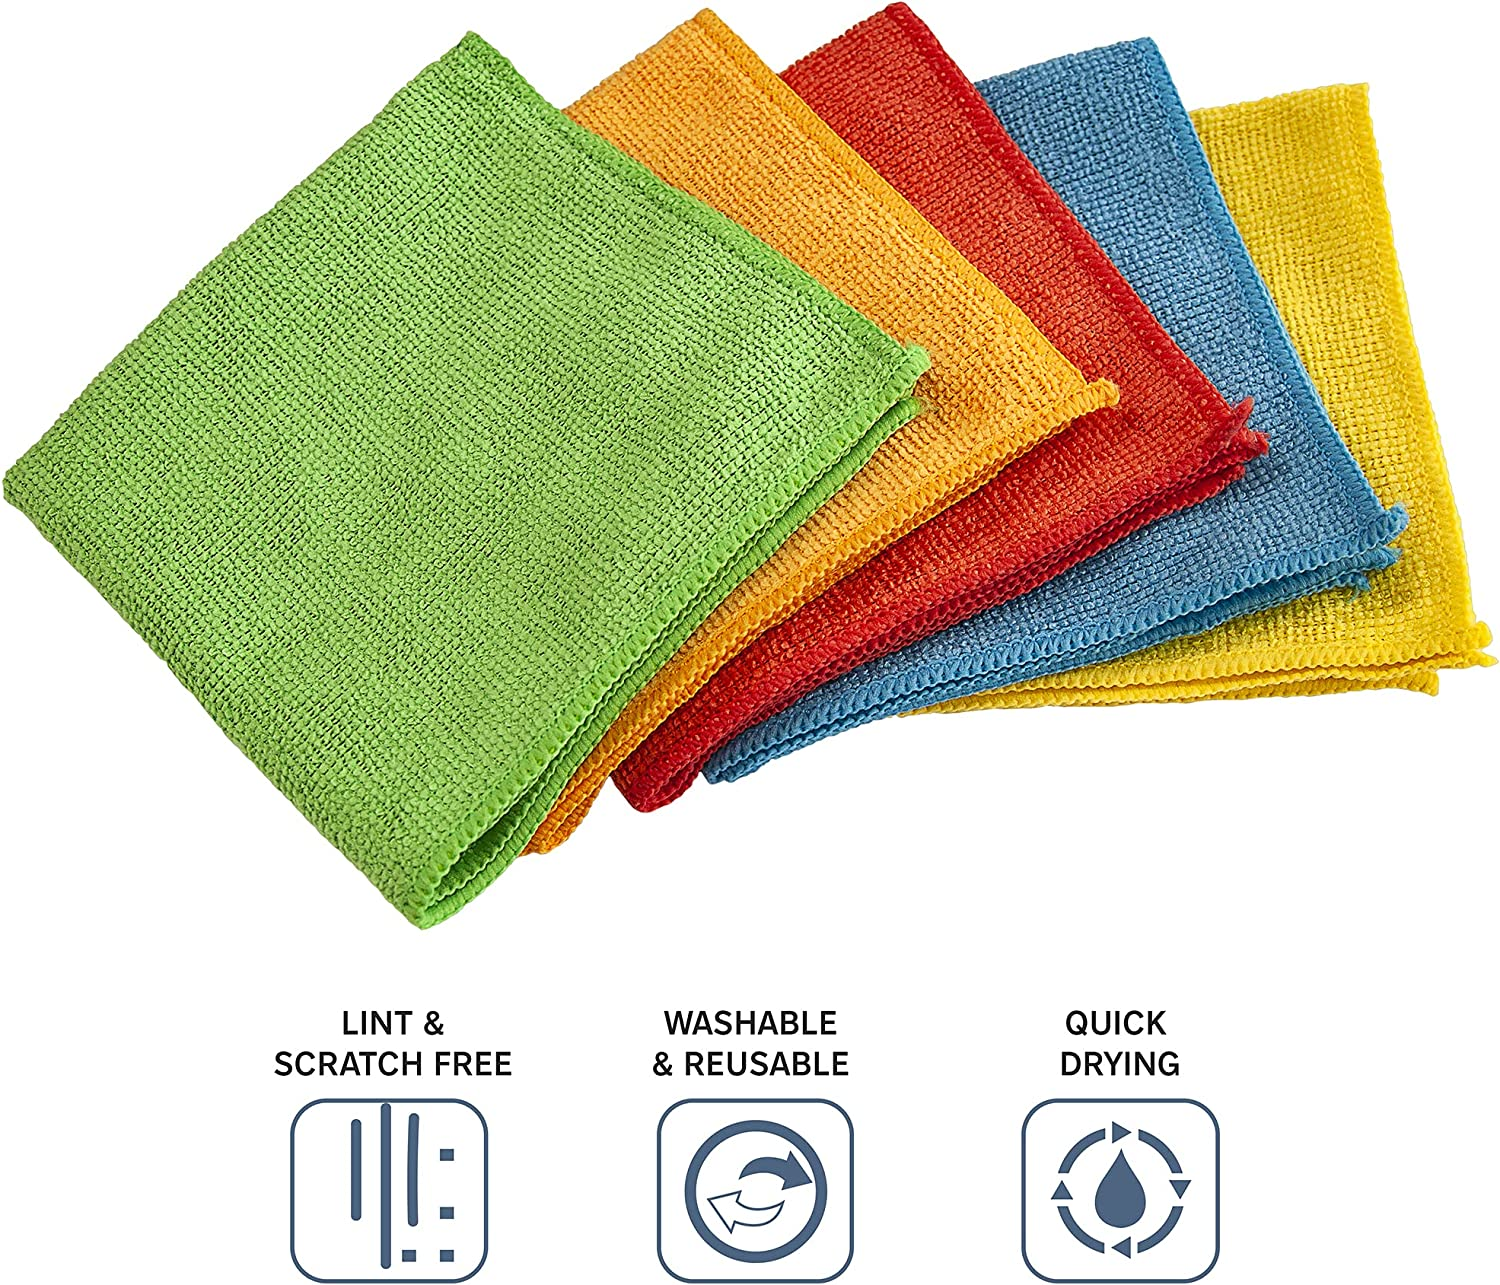 Microfiber Cleaning Cloths for Home, Kitchen, and Auto Detailing, 11.5 by 11.5 Inches, 5 Colors, 25 Pack